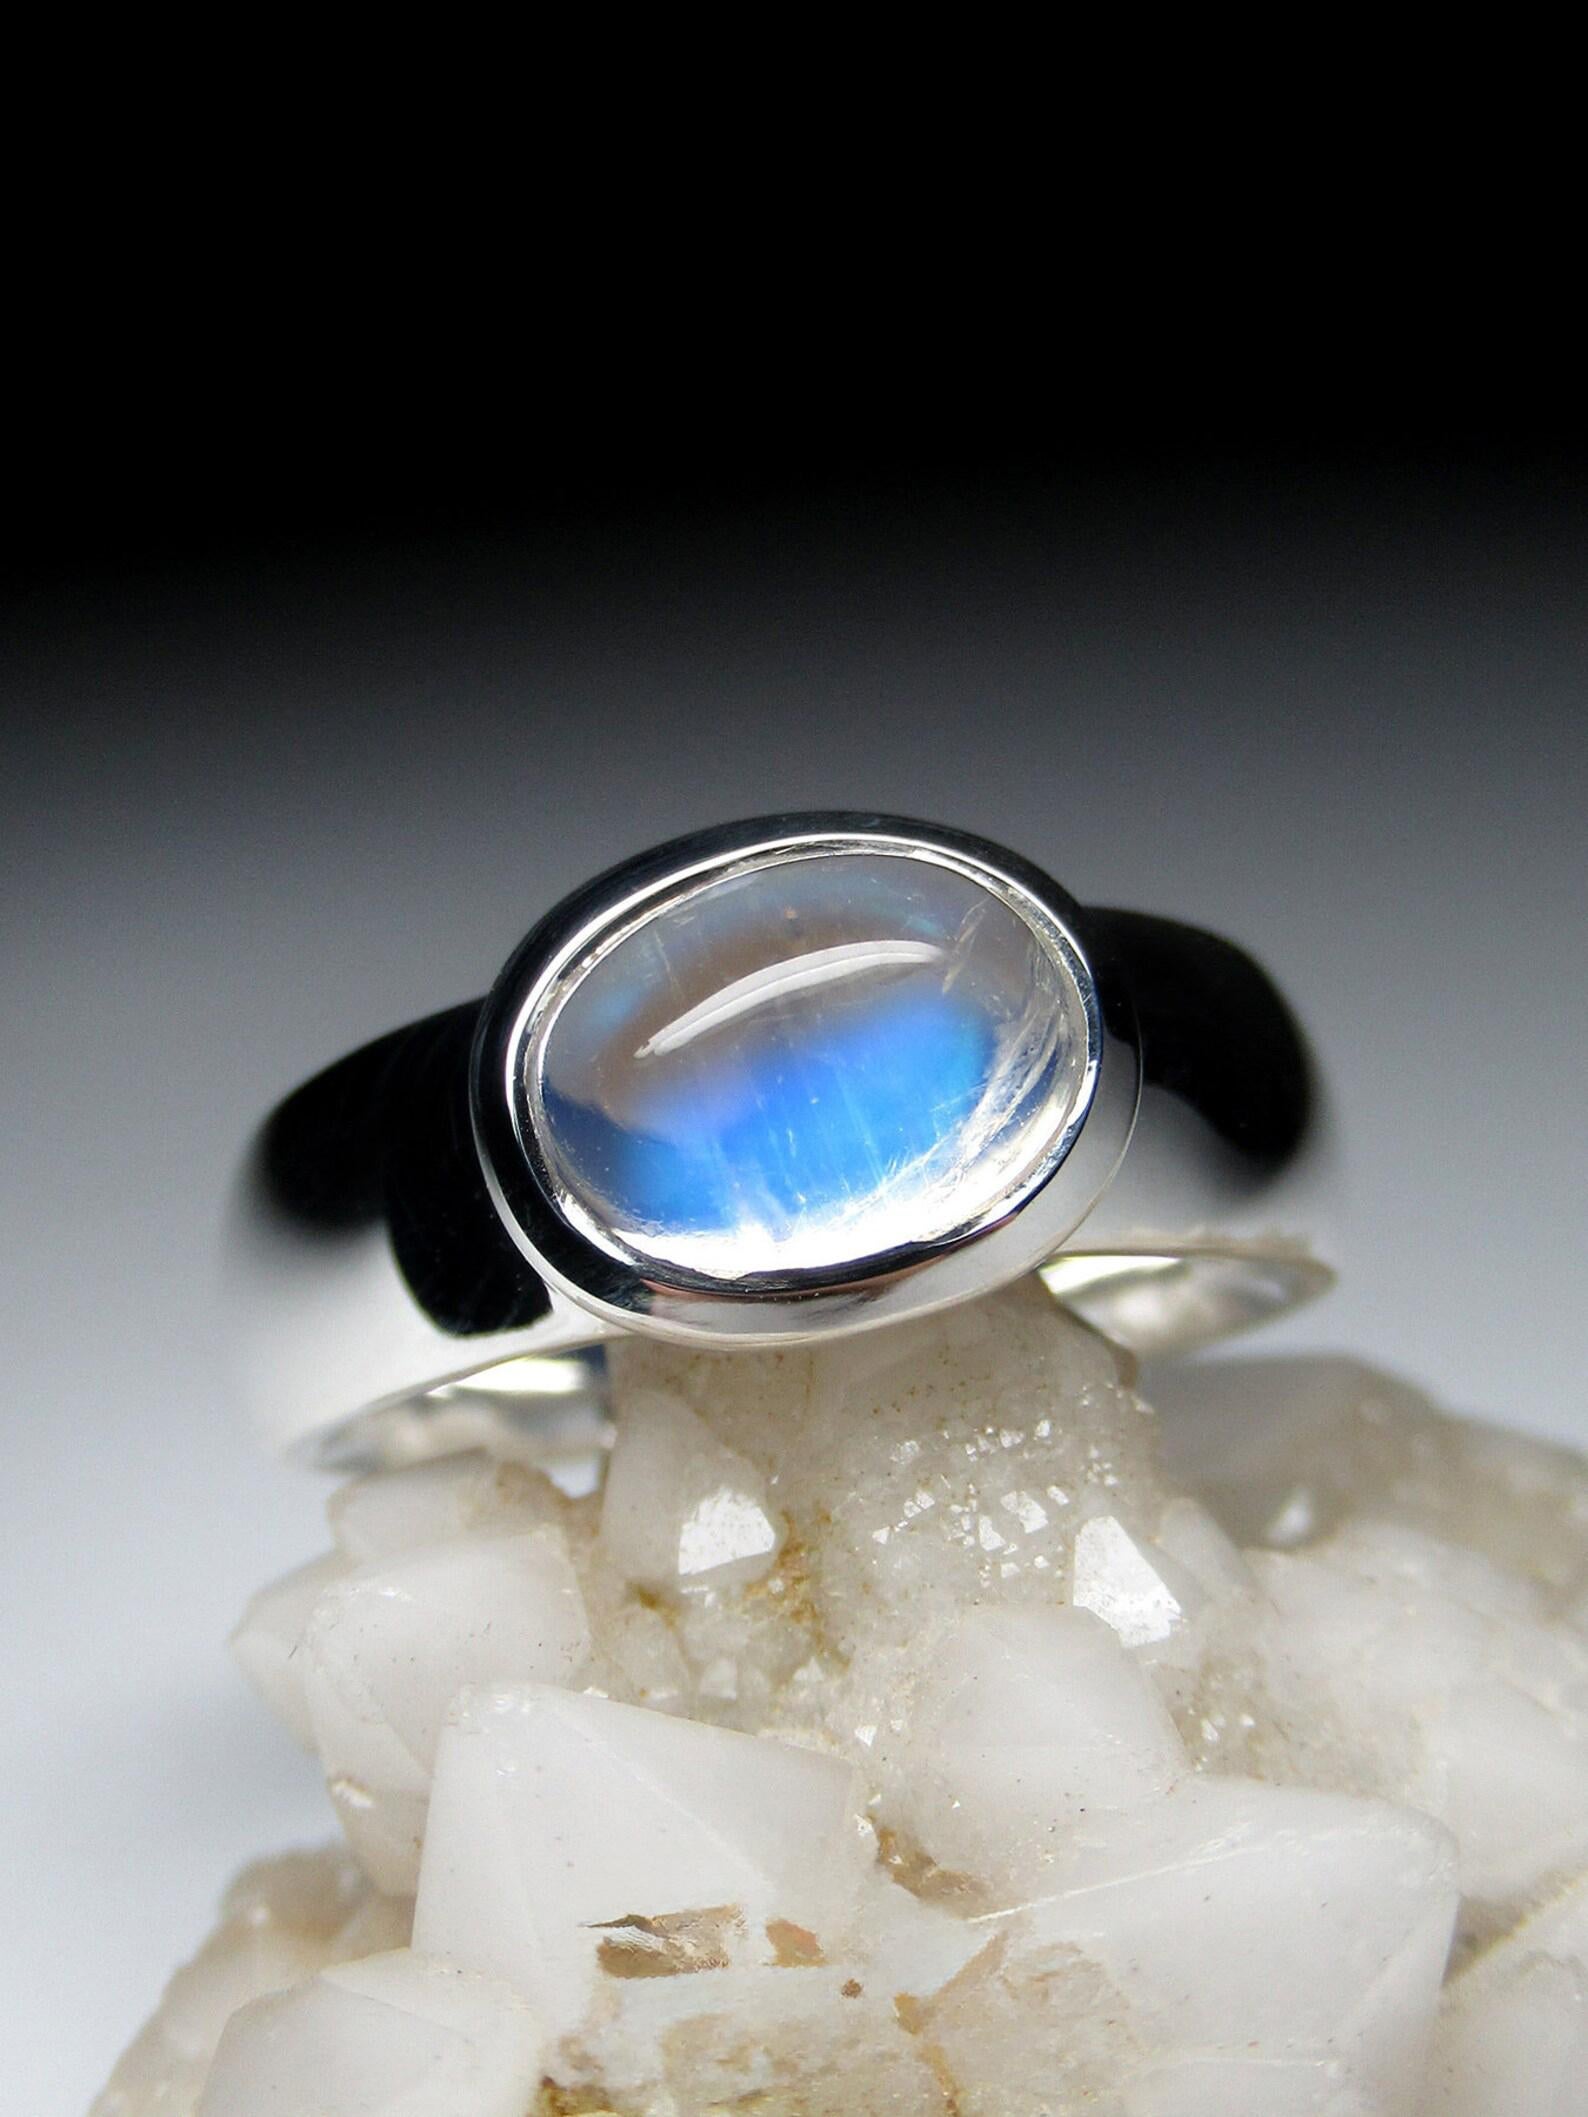 Silver ring with natural cabochon-cut Moonstone 
gemstone origin - Sri Lanka
moonstone measurements - 0.16 х 0.24 x 0.31 in / 4 х 6 х 8 mm
moonstone weight - 1.5 carat
ring weight about 5.45 grams
ring size - 5, 6, 6.25, 7, 7.5, 7.75 US 